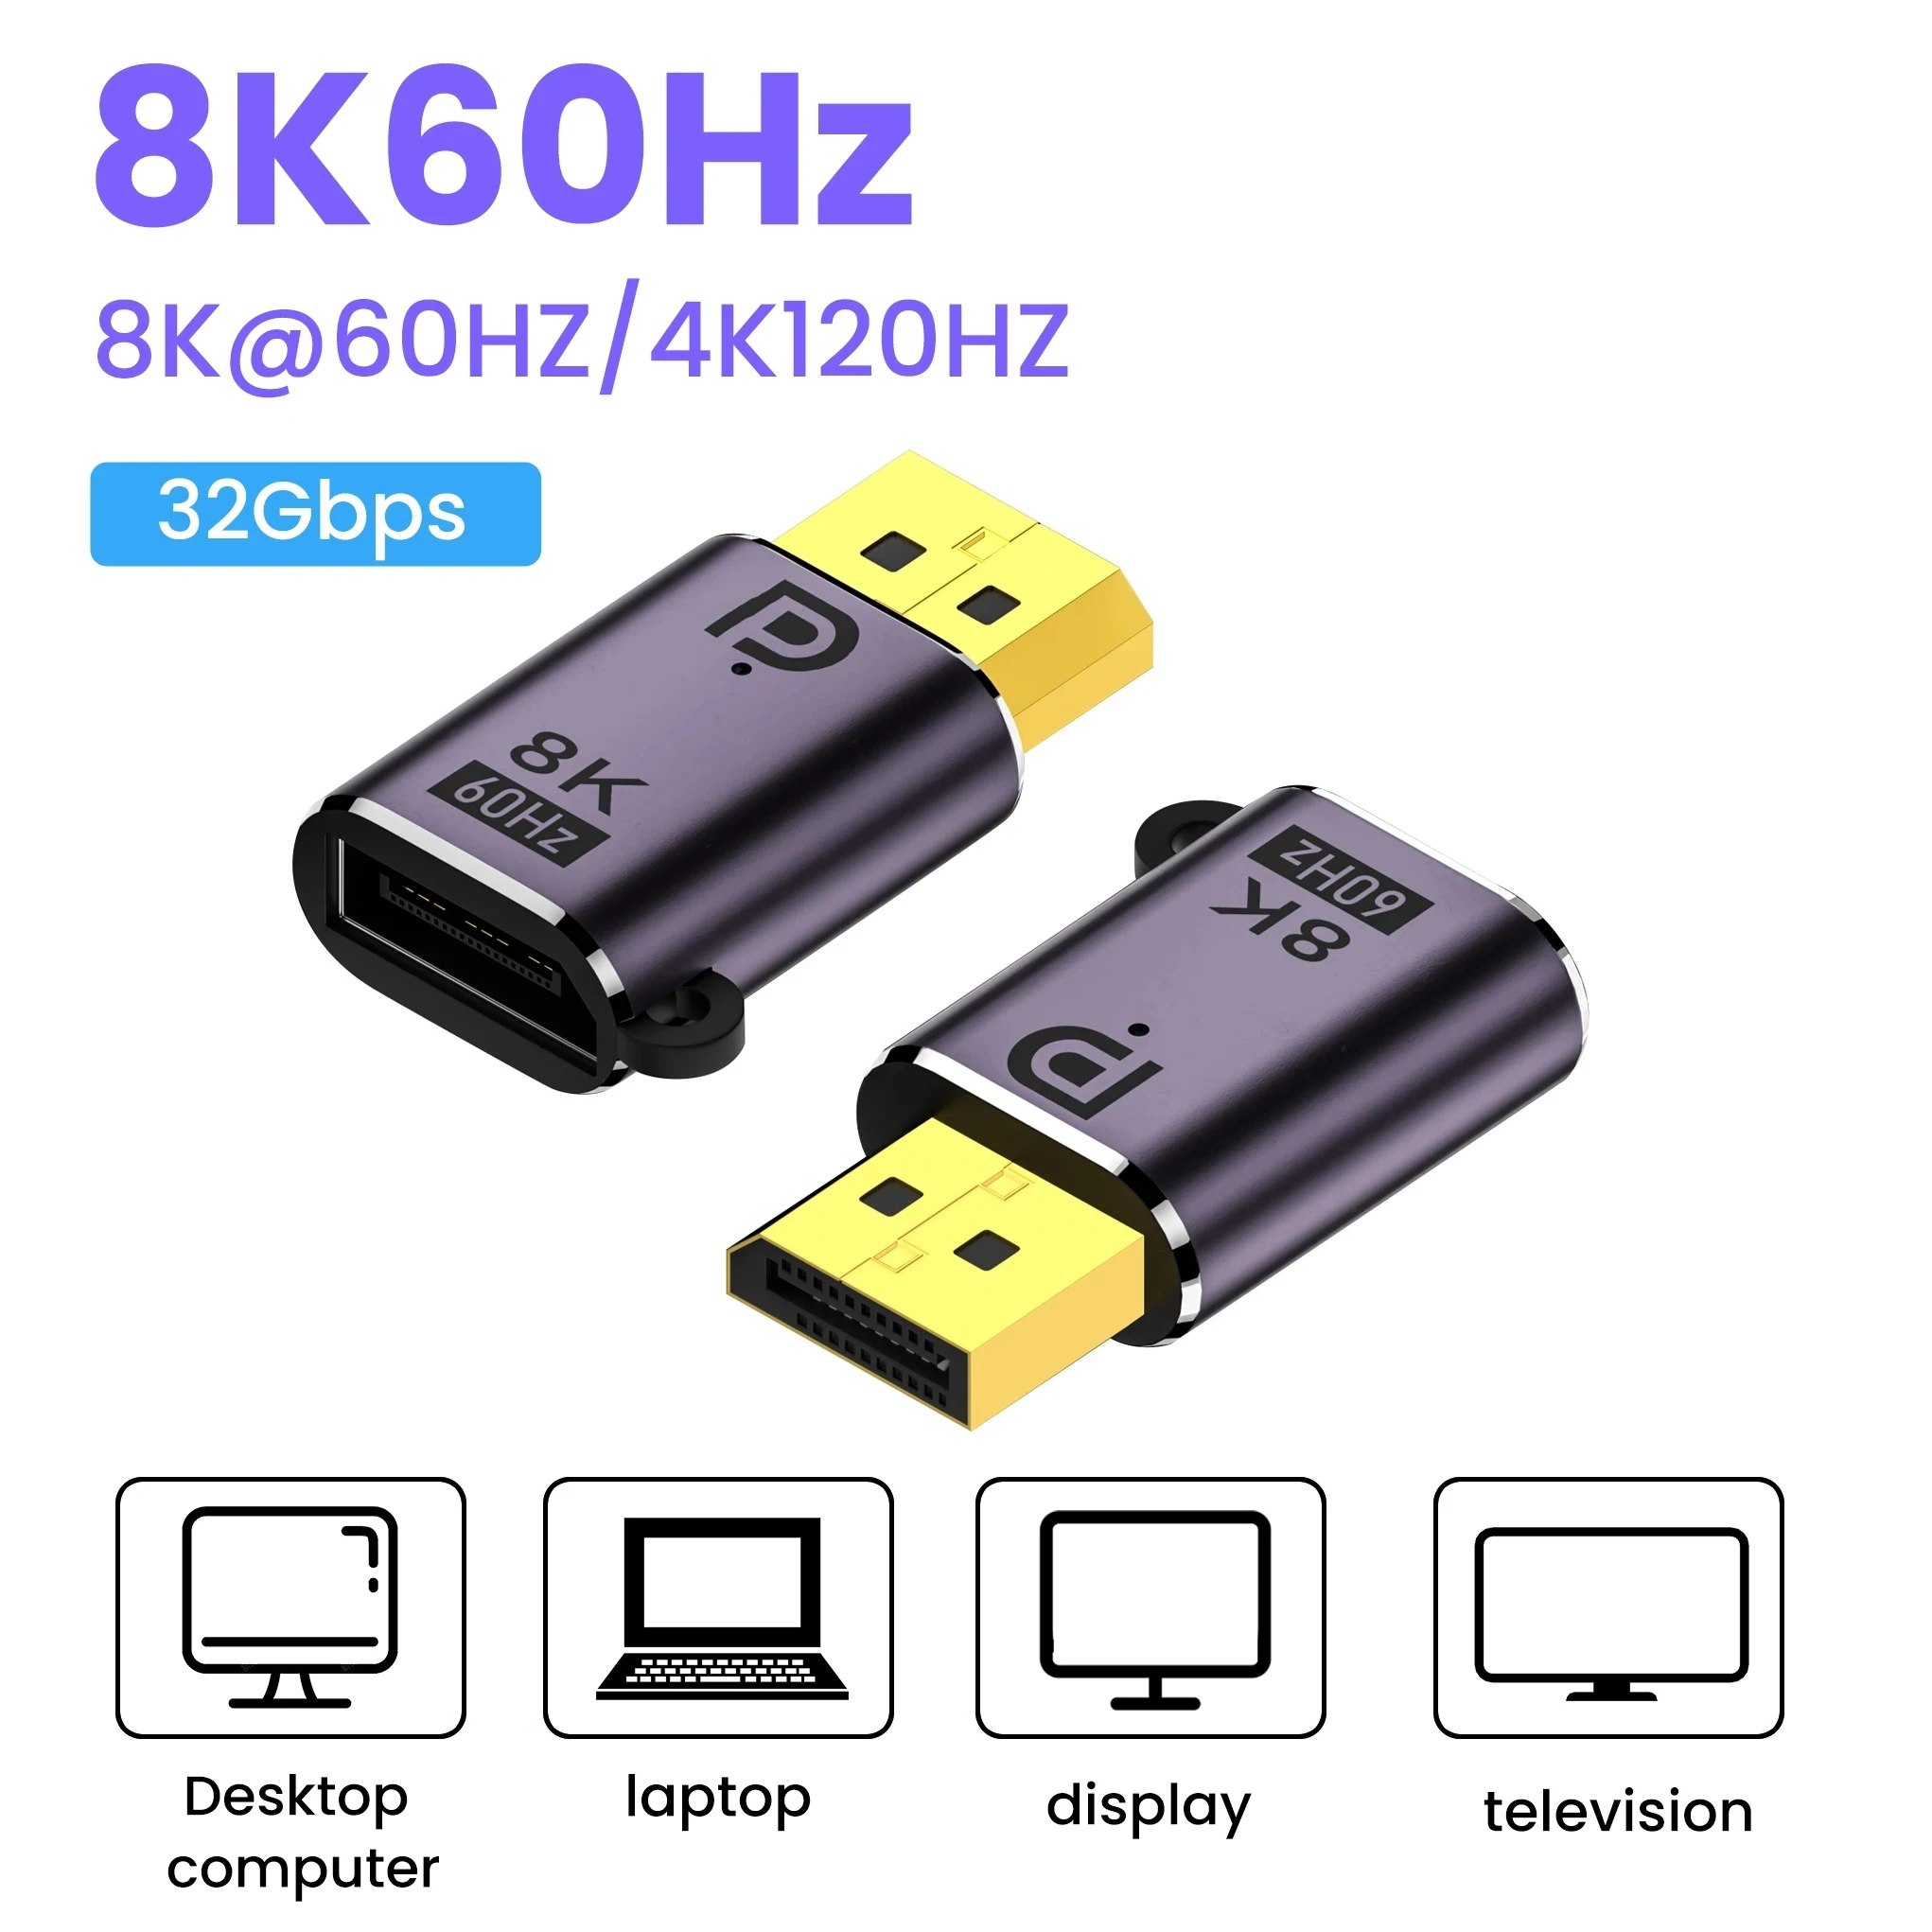 

Mini DP to Displayport 1.4 Adapter Converter 8K@60Hz Bi-Directional DP to Mini DP Male to Female Cable Extender for MacBook Pro